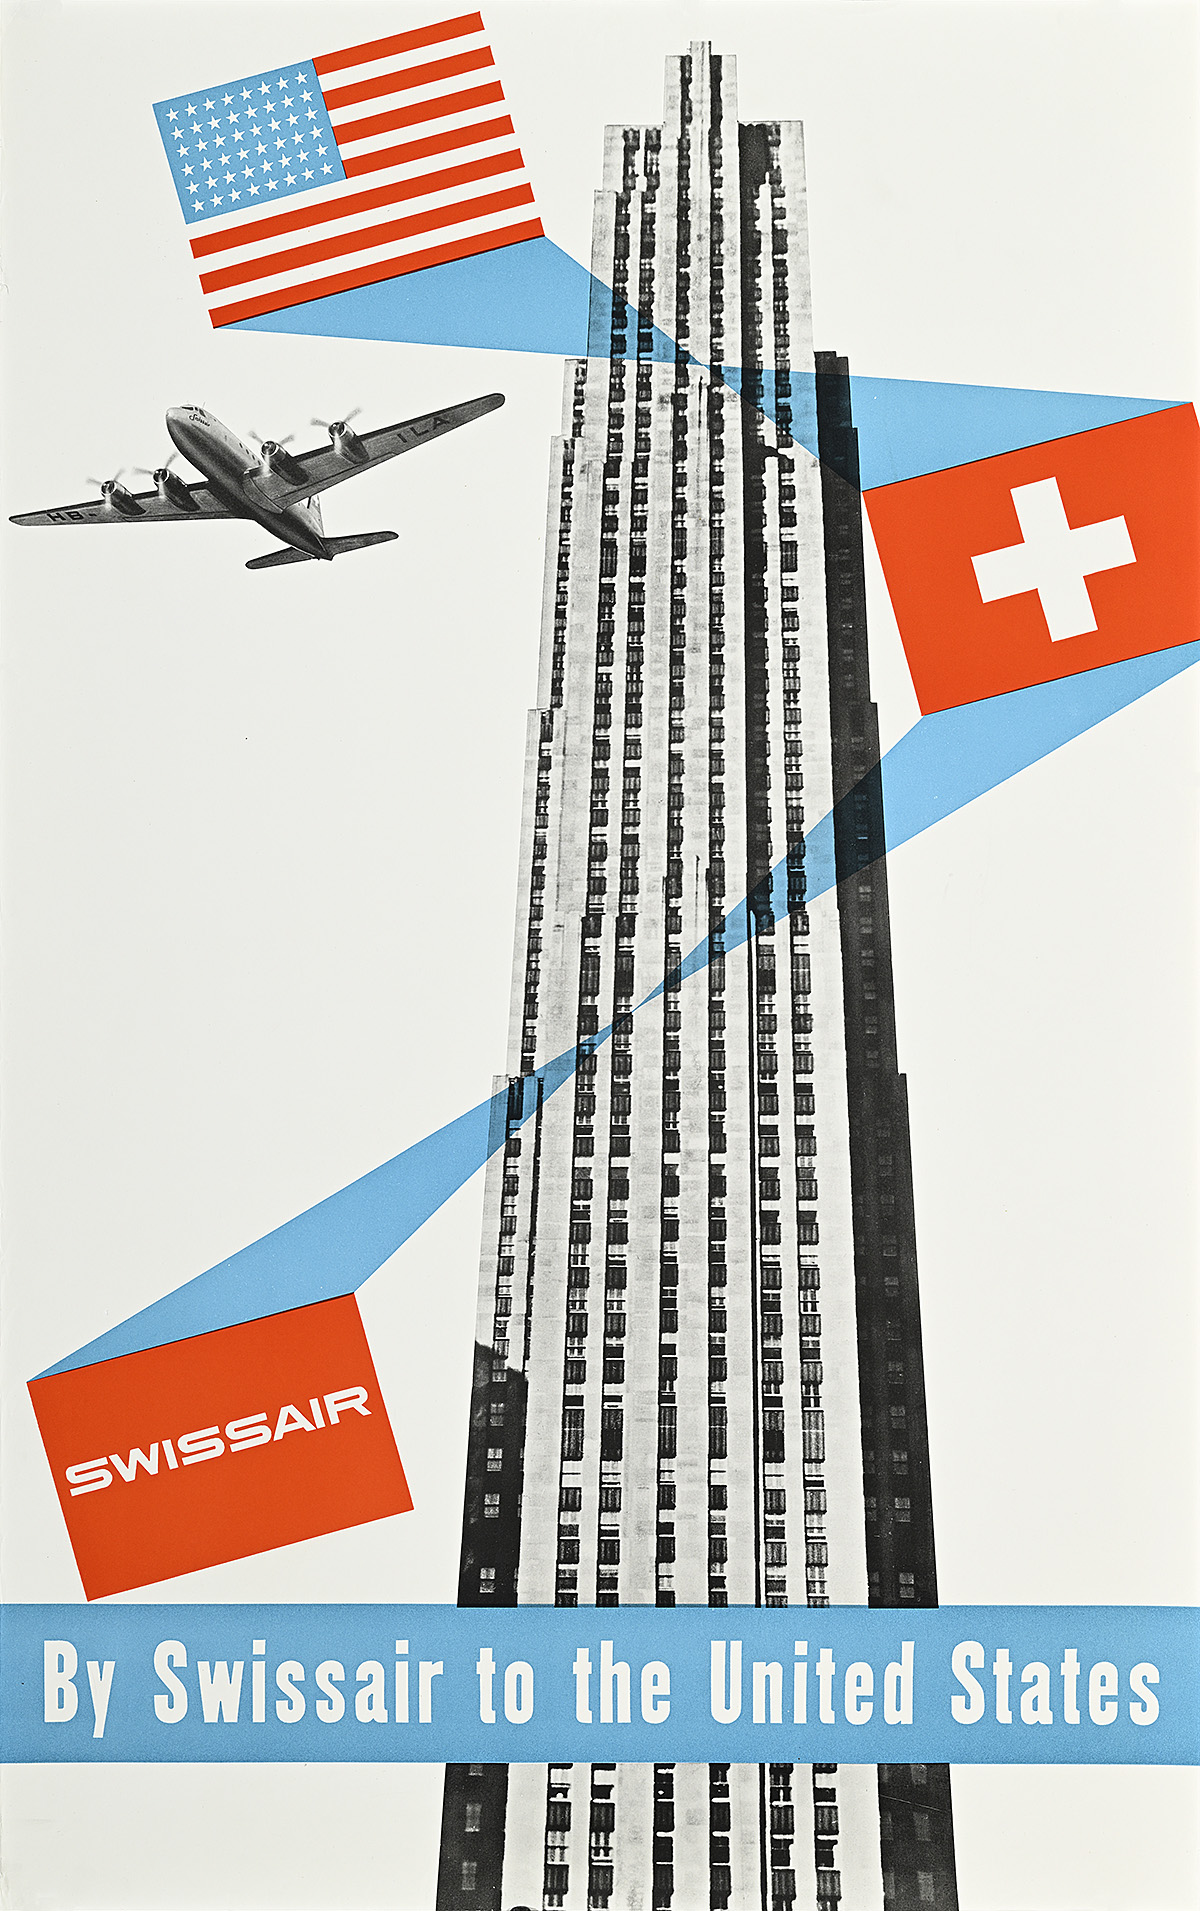 A poster of an airplane flying by a skyscraper, the American and Swiss flags, and the Swissair logo.